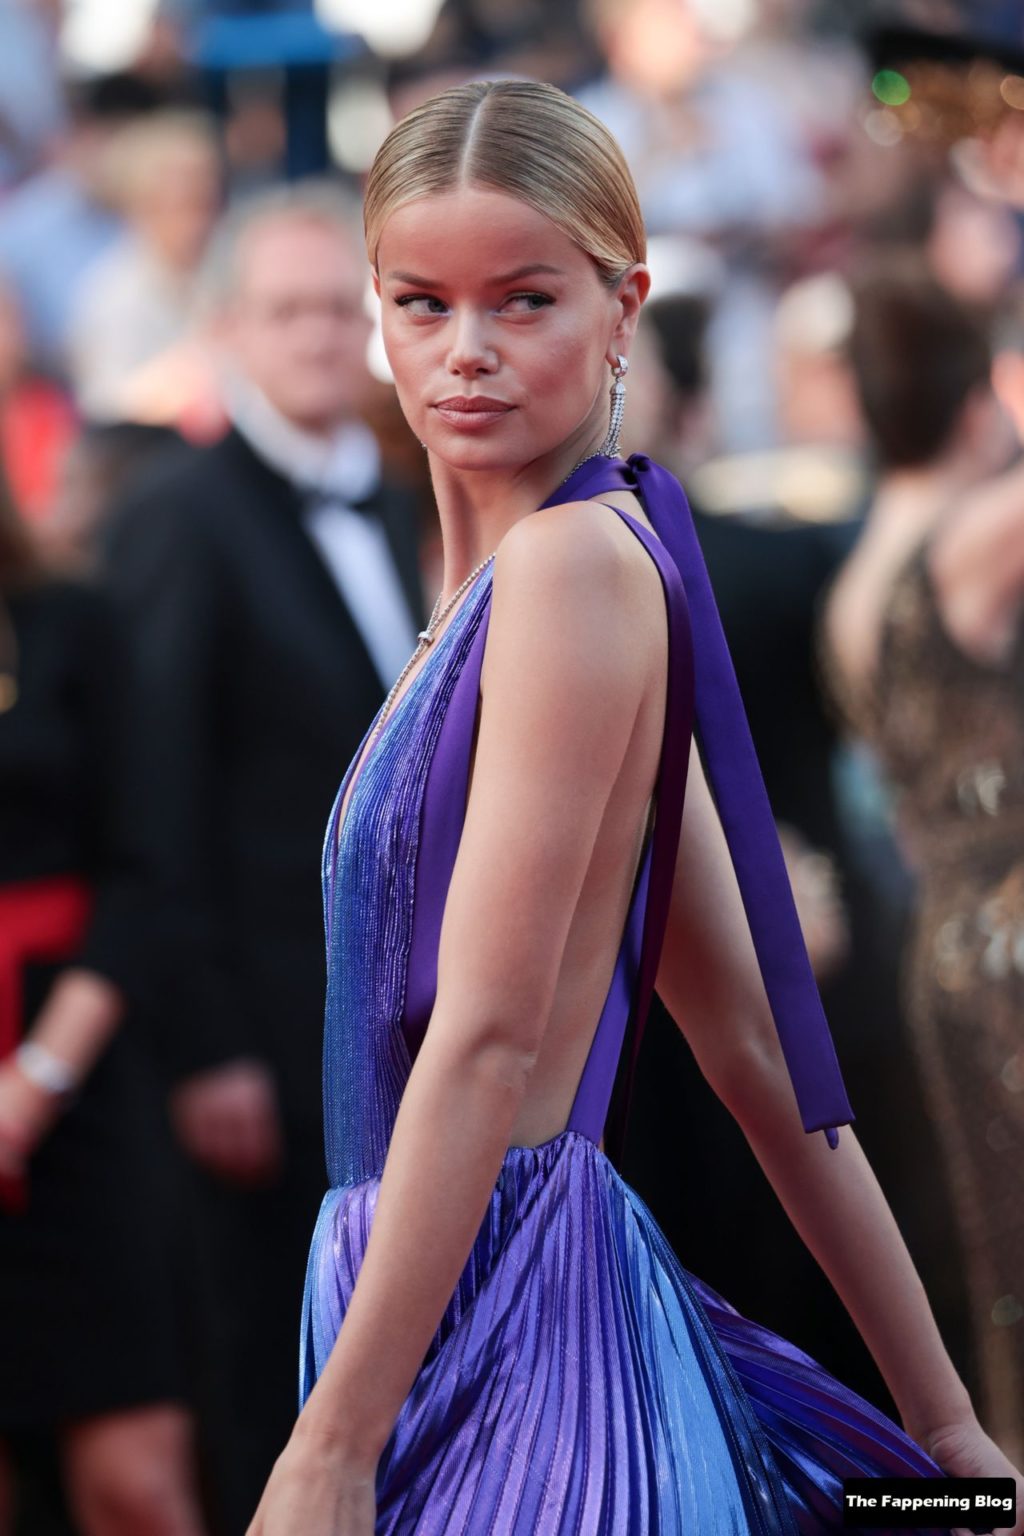 Frida Aasen Sexy The Fappening Blog 79 1 1024x1536 - Frida Aasen Poses on the Red Carpet at the 75th Annual Cannes Film Festival (150 Photos)